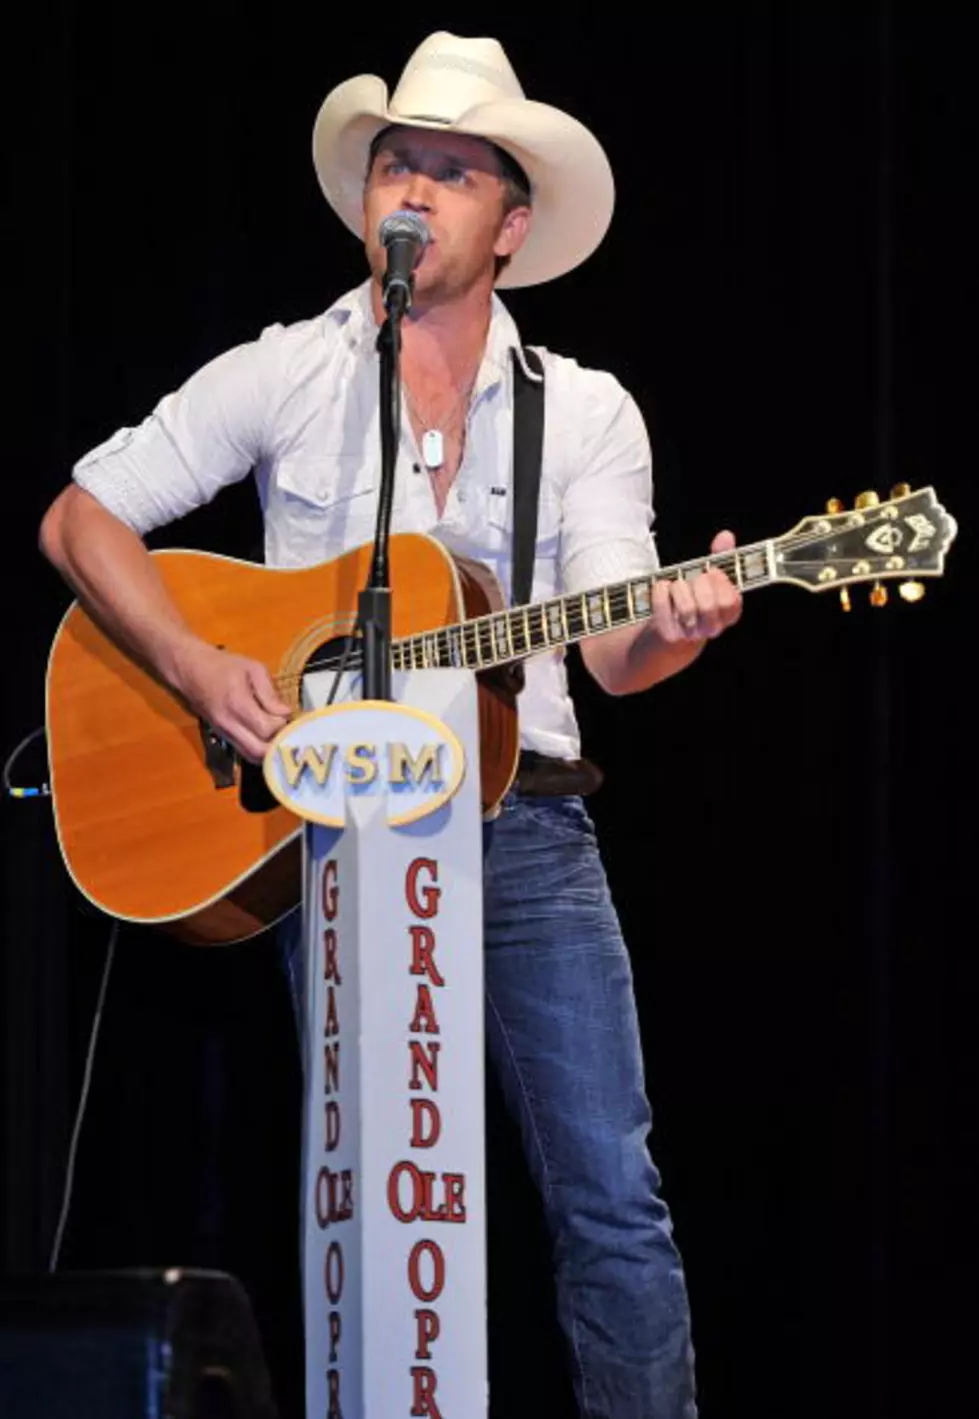 Blake Shelton And Justin Moore Battle Today On Danny’s Daily Duel [AUDIO]